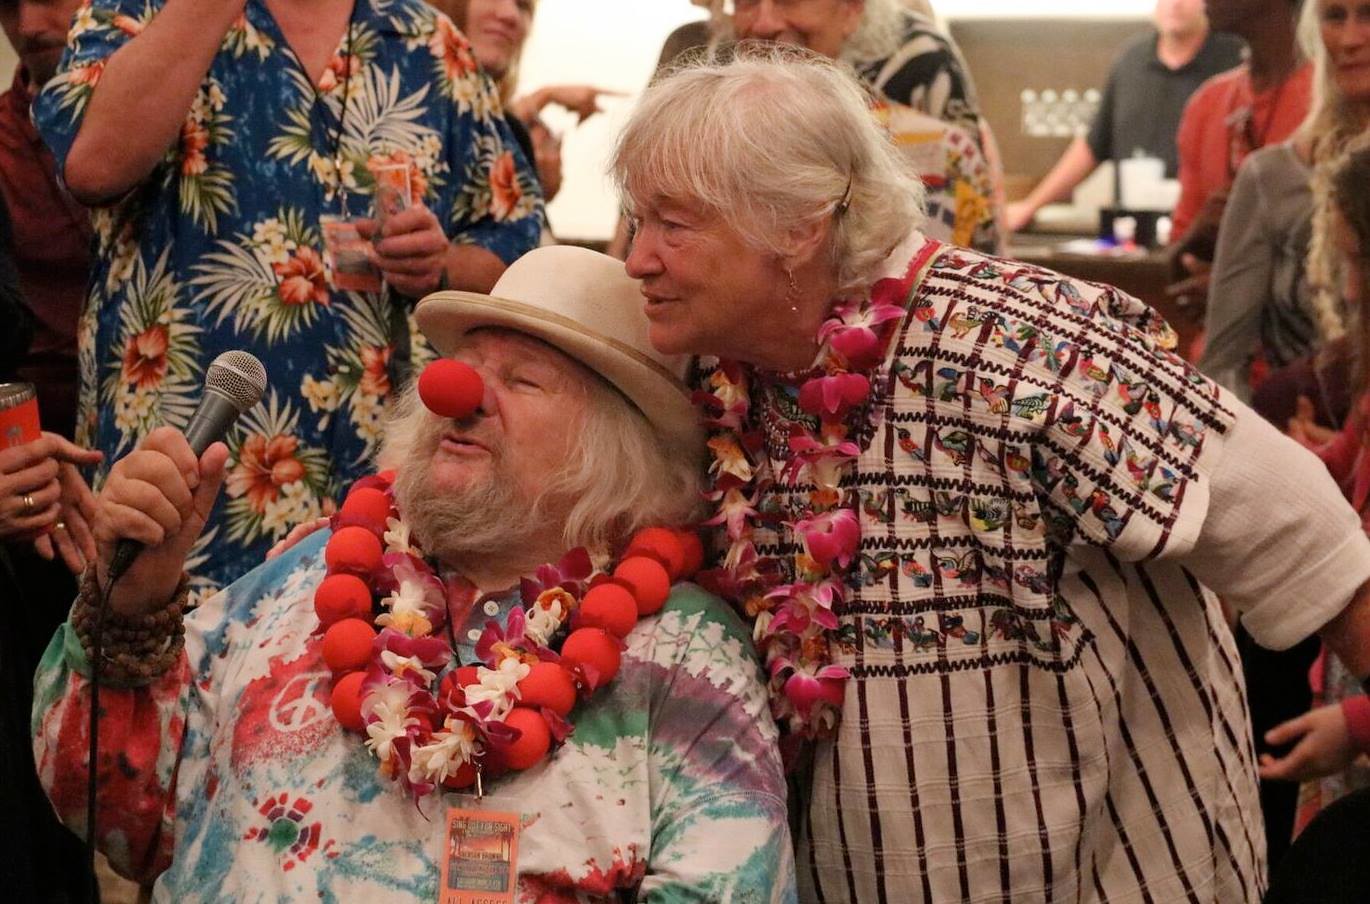 Seva co-founders Wavy Gravy and Jahanara Romney say a few words during the VIP after show reception.